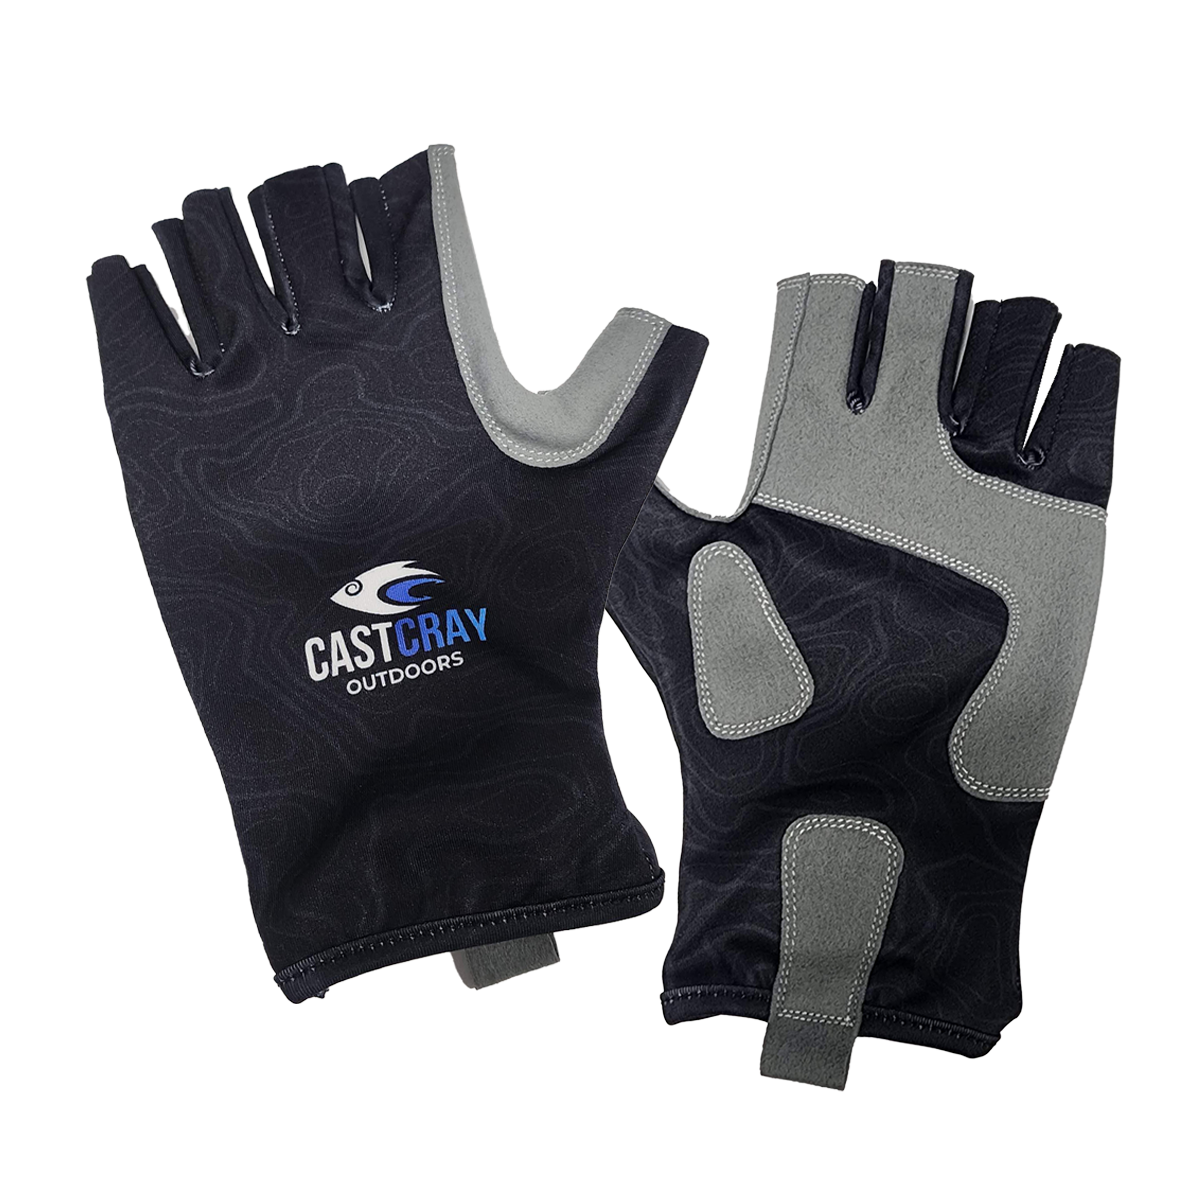 GLOVES Archives - Cast Cray Outdoors